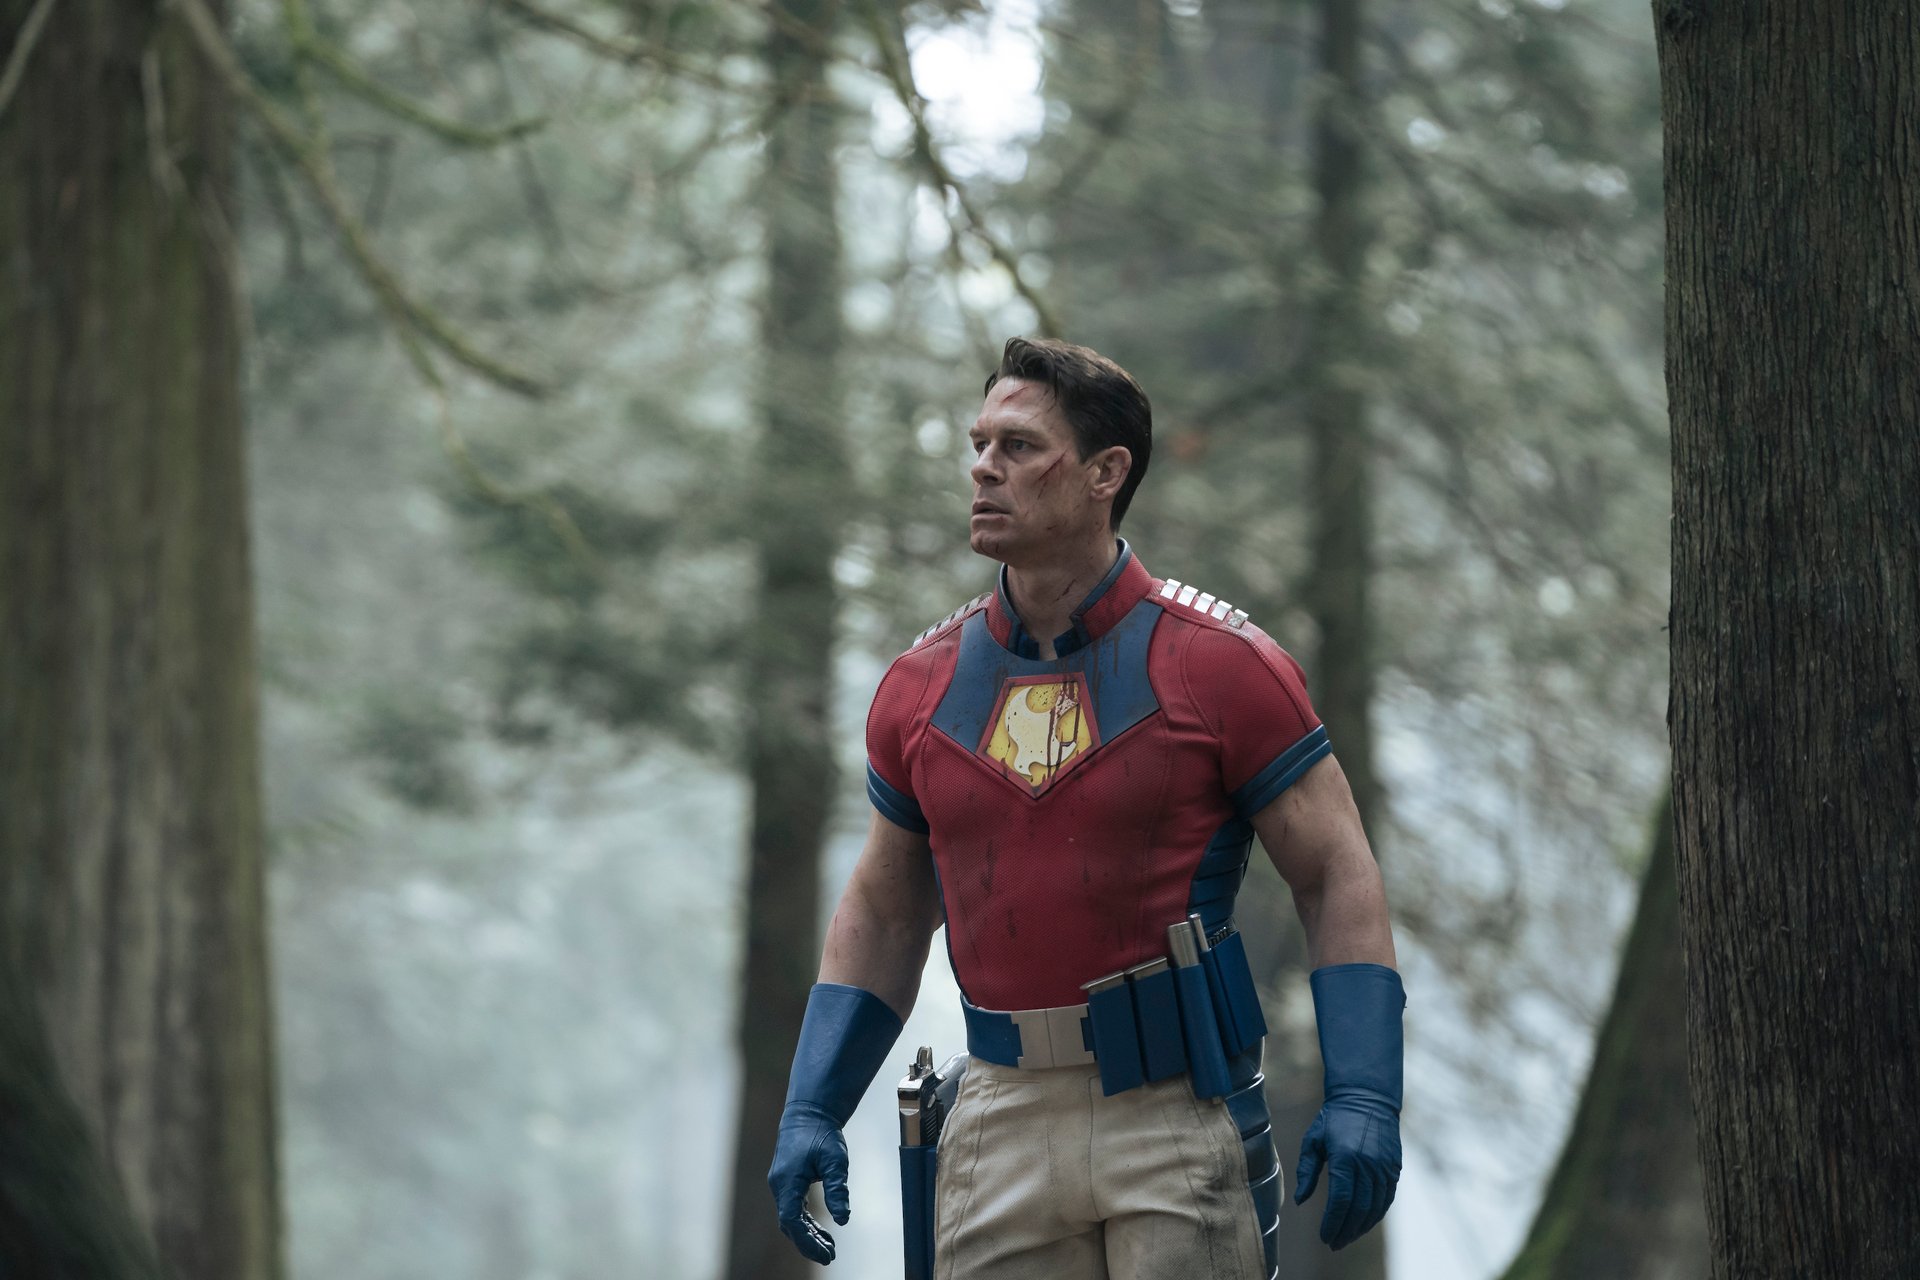 John Cena as Christopher Smith in DC's 'Peacemaker' Episode 8. He's standing in the woods and looks surprised.